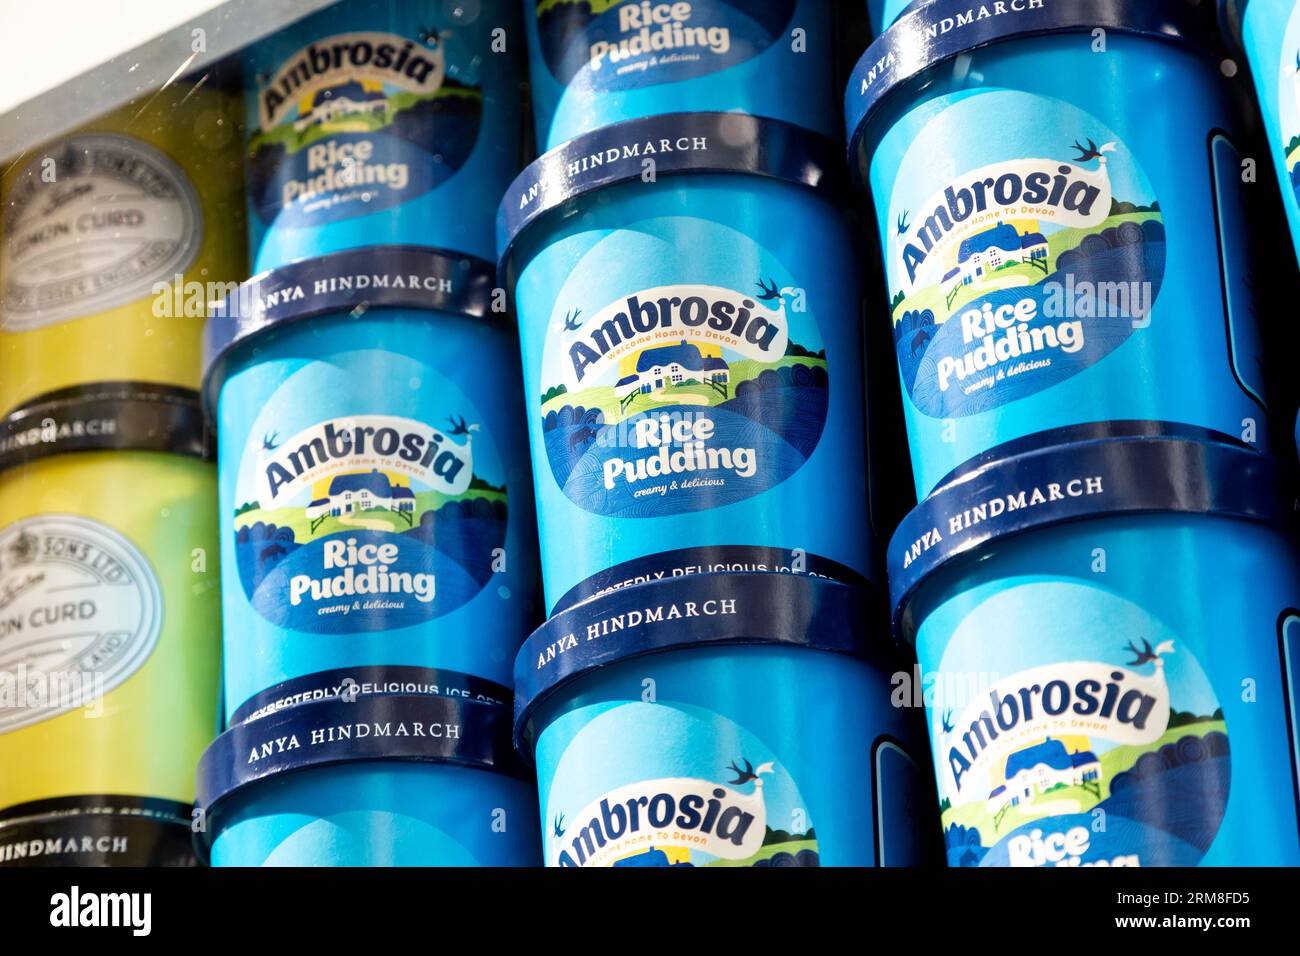 Ambrosia rice pudding flavour ice cream tubs at the Anya Hindmarch Ice Cream Project, London, England Stock Photo